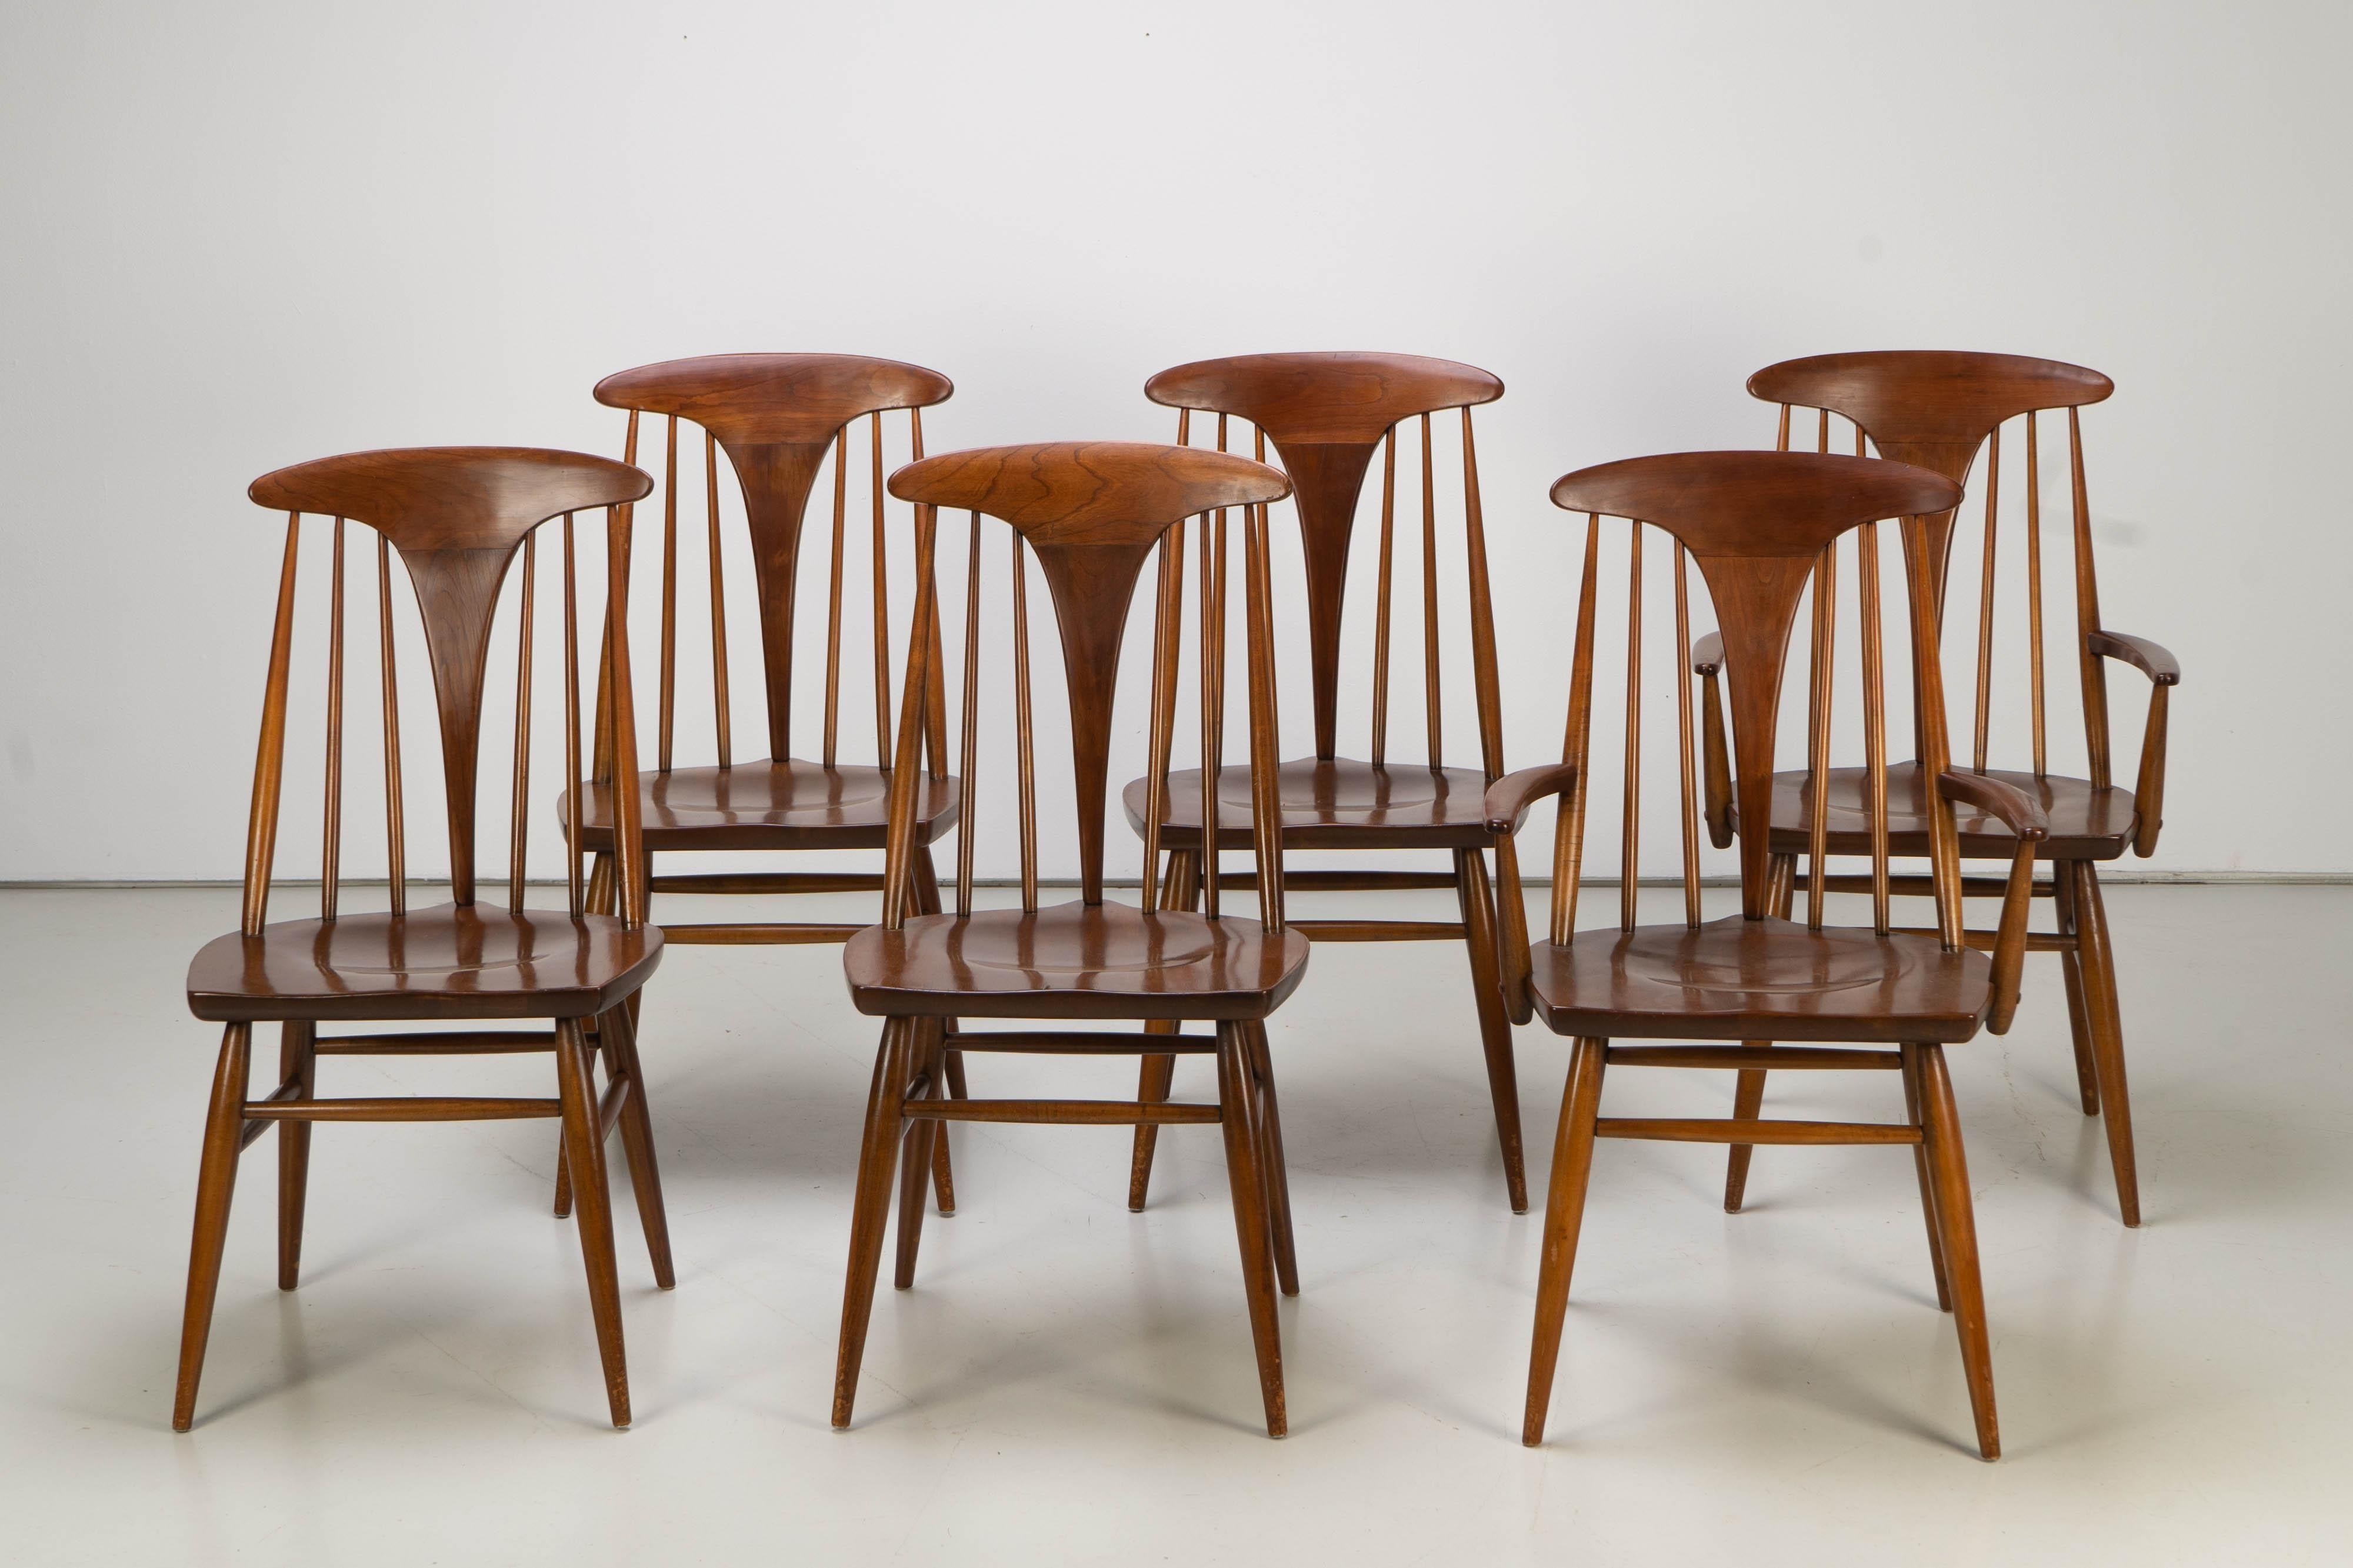 Set of six Mid-Century Modern spindle back chairs manufactured by Heywood Wakefield. 
Sidechairs are 50 cm wide, arm chairs 58 cm.